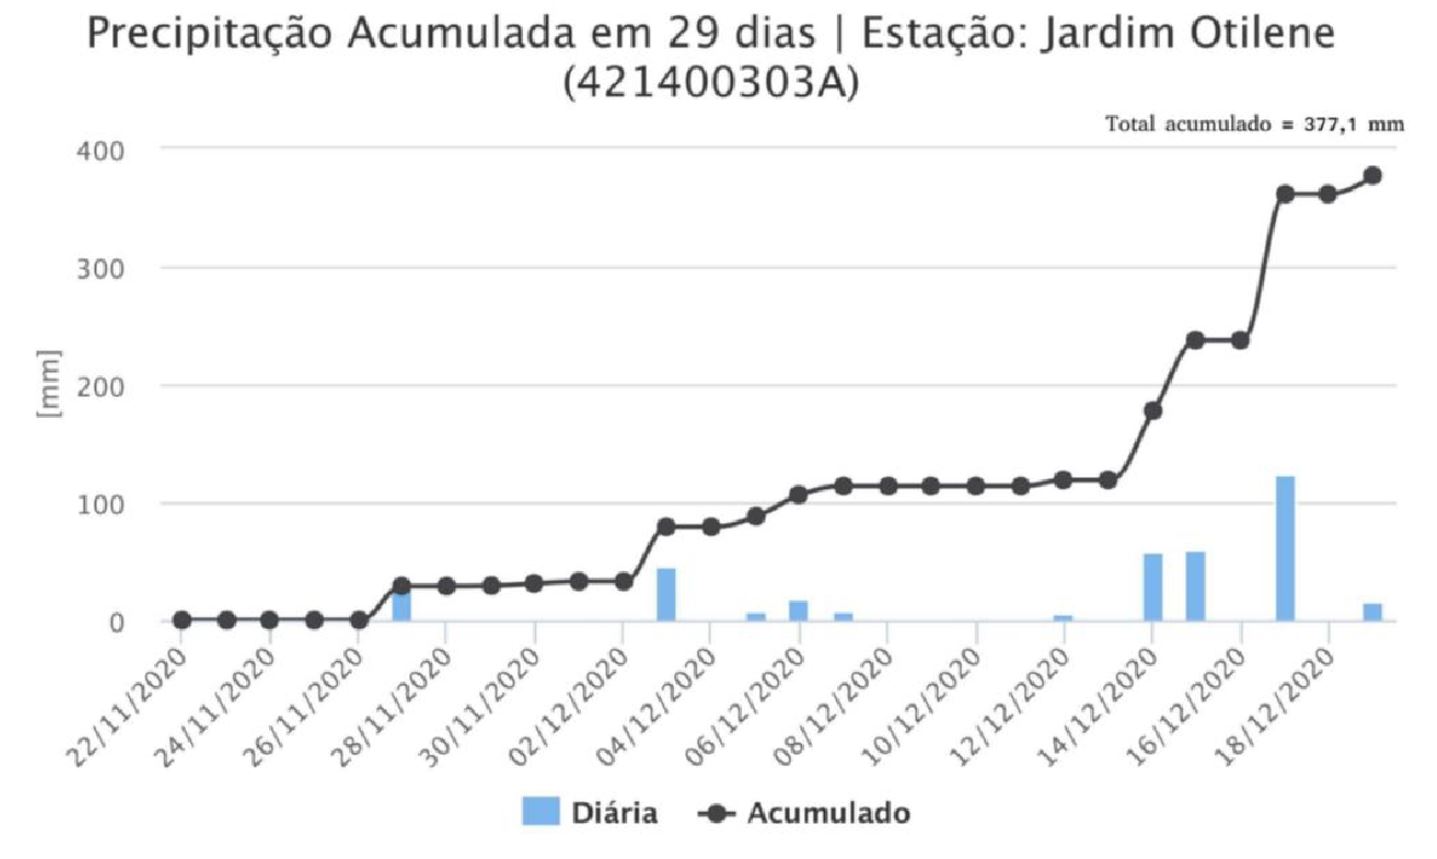 The monthly cumulative rainfall at the Jardim Otilene Station from 21 November to 19 December 2020.